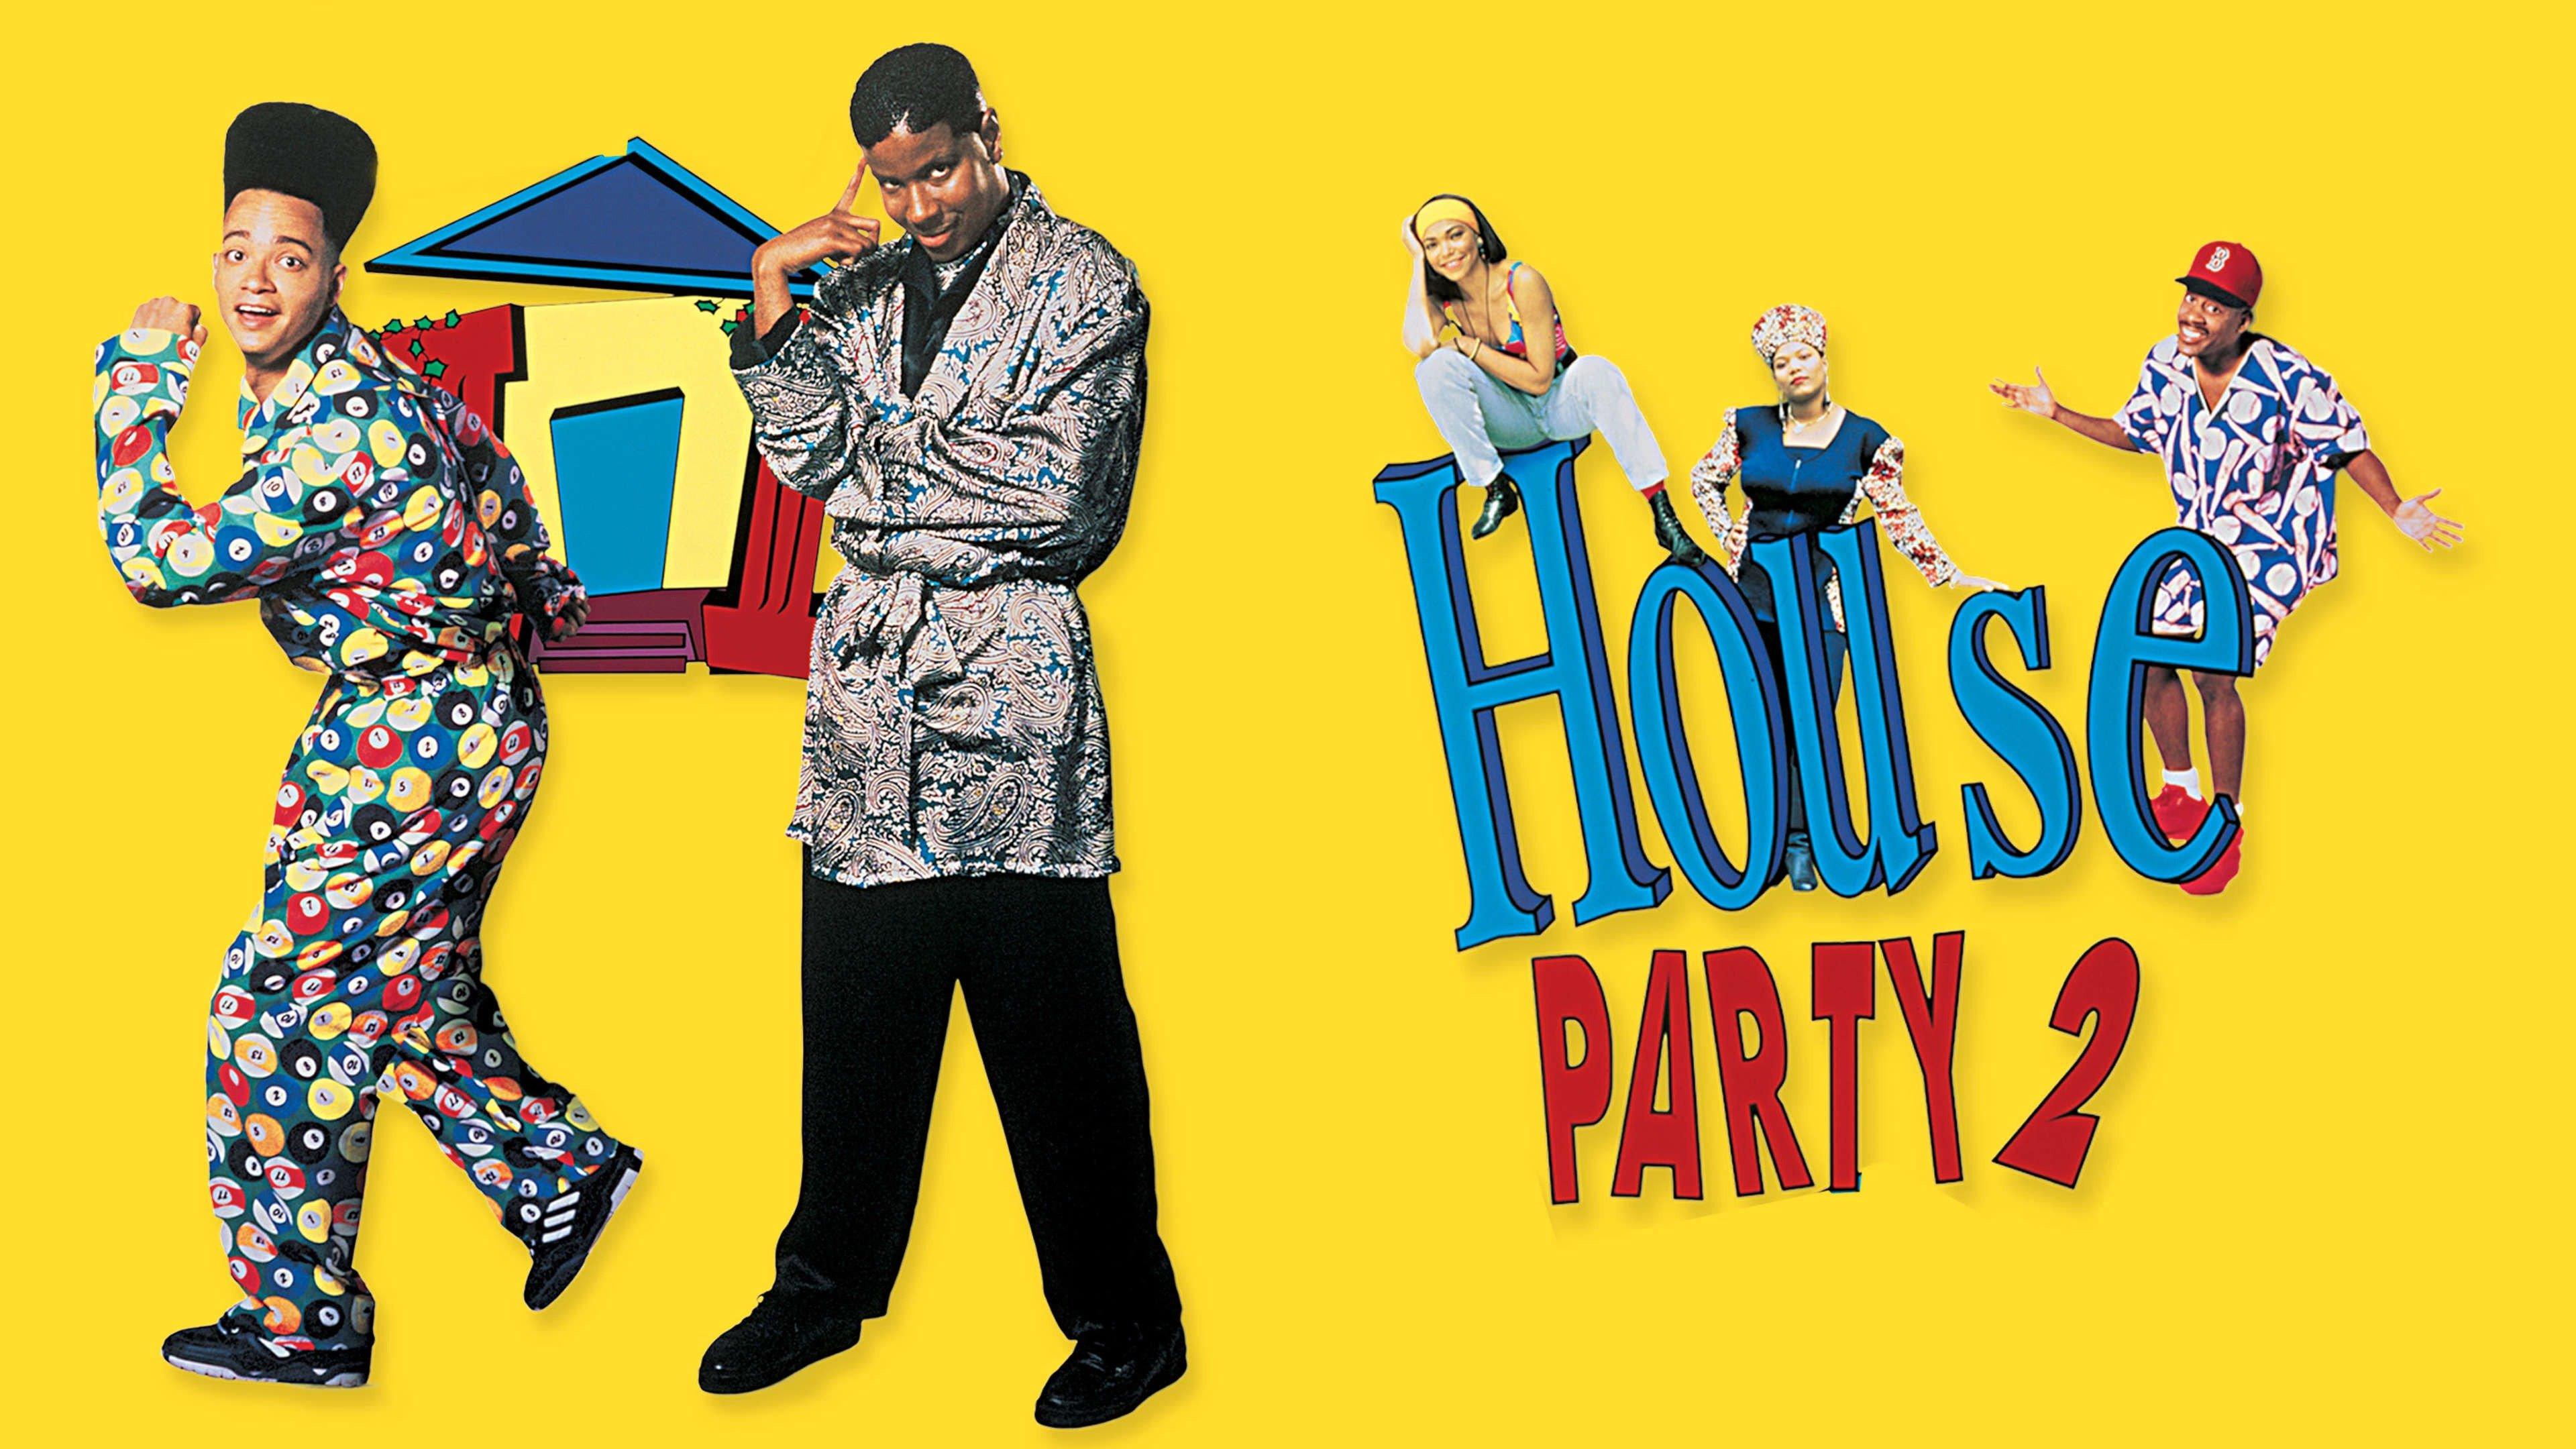 Watch House Party 2 Streaming Online on Philo (Free Trial)